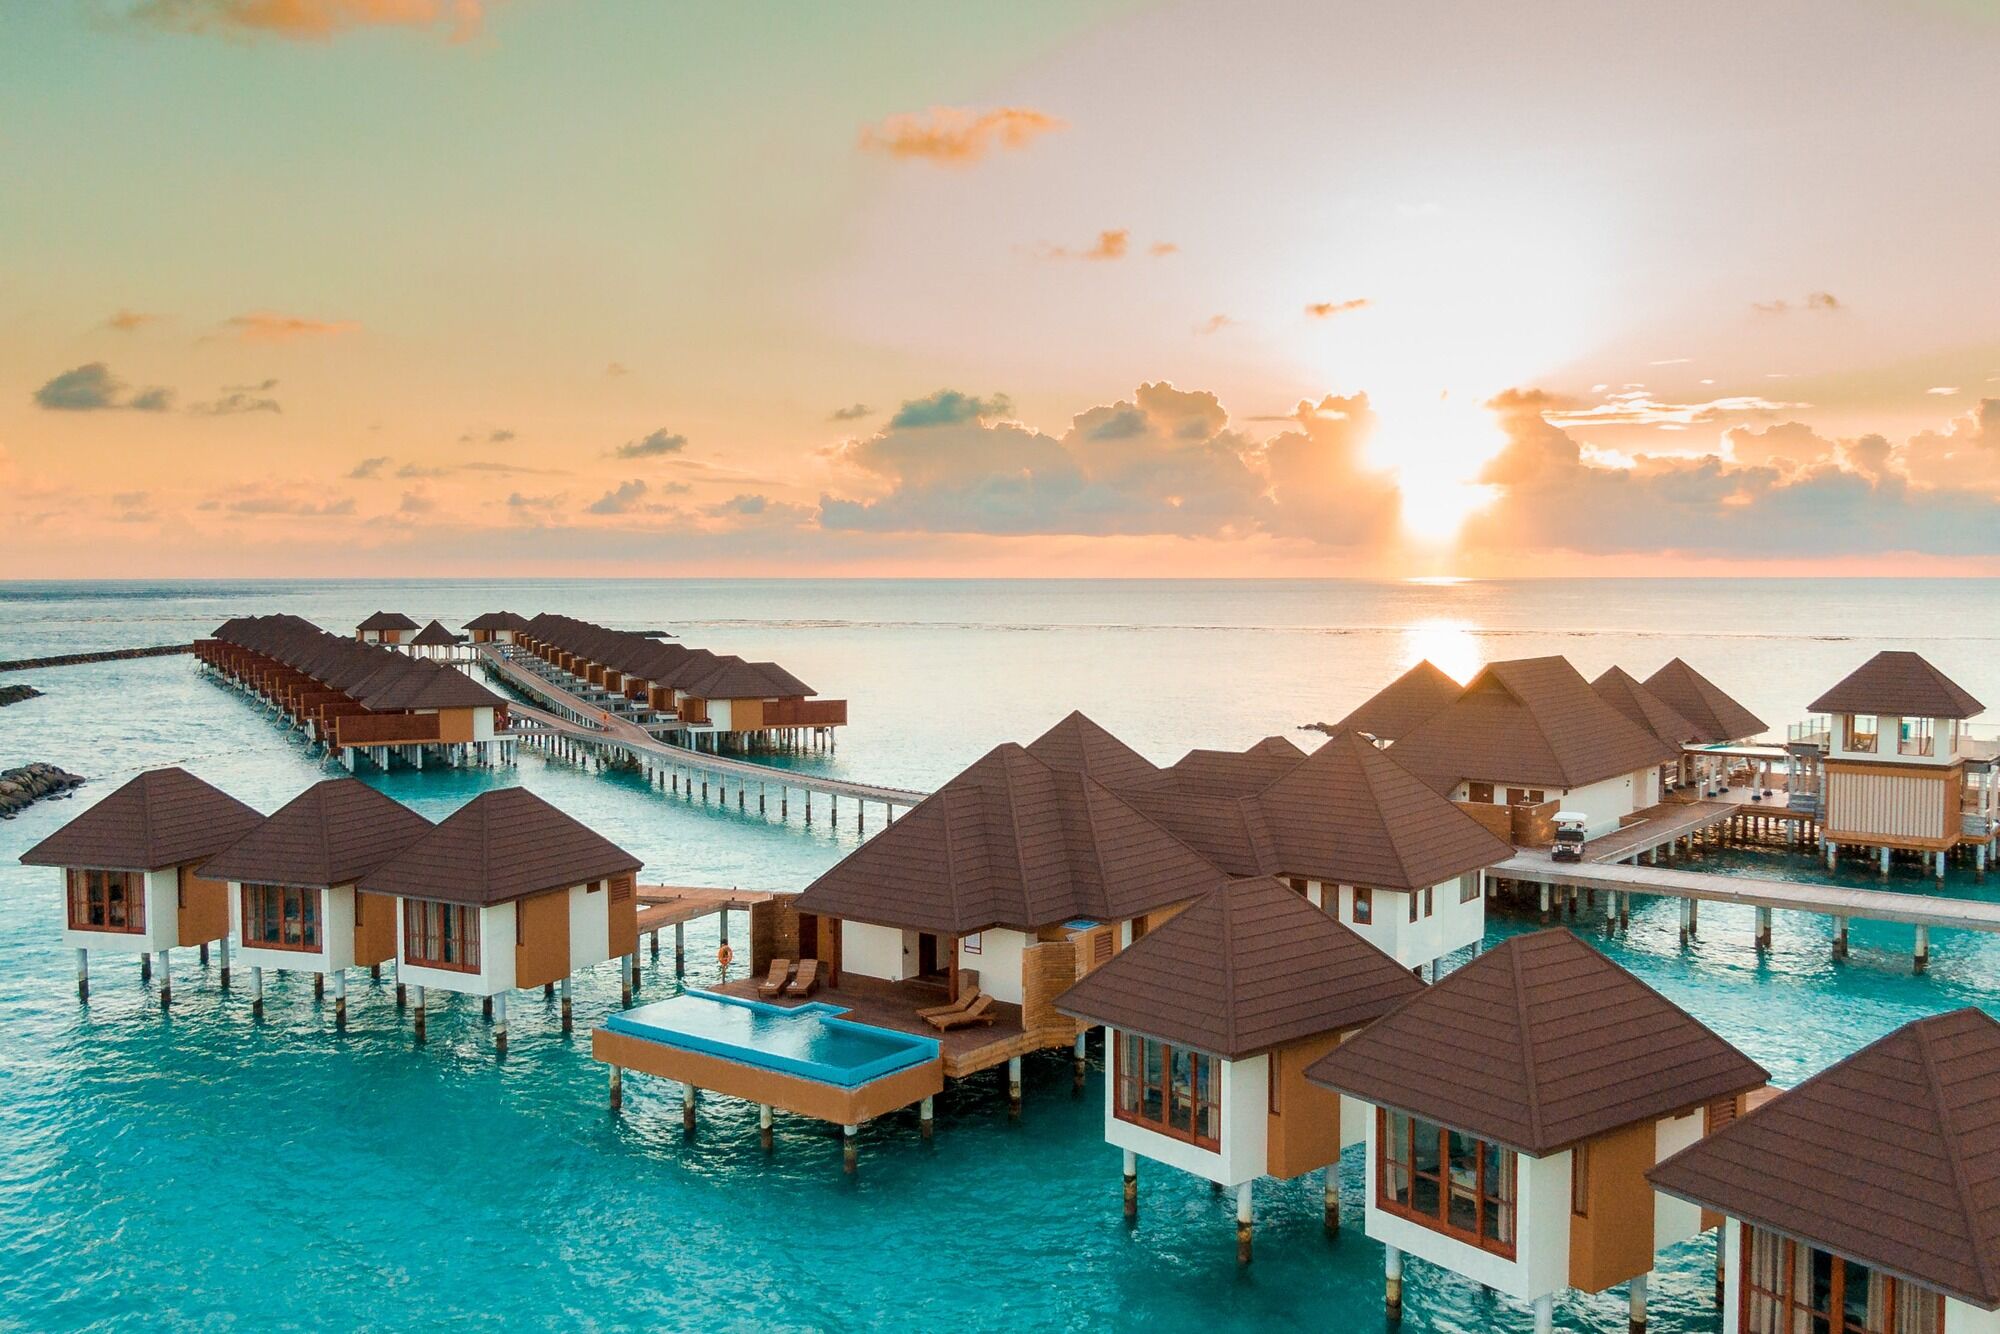 Travel expert named a common mistake of British tourists booking a vacation in the Maldives